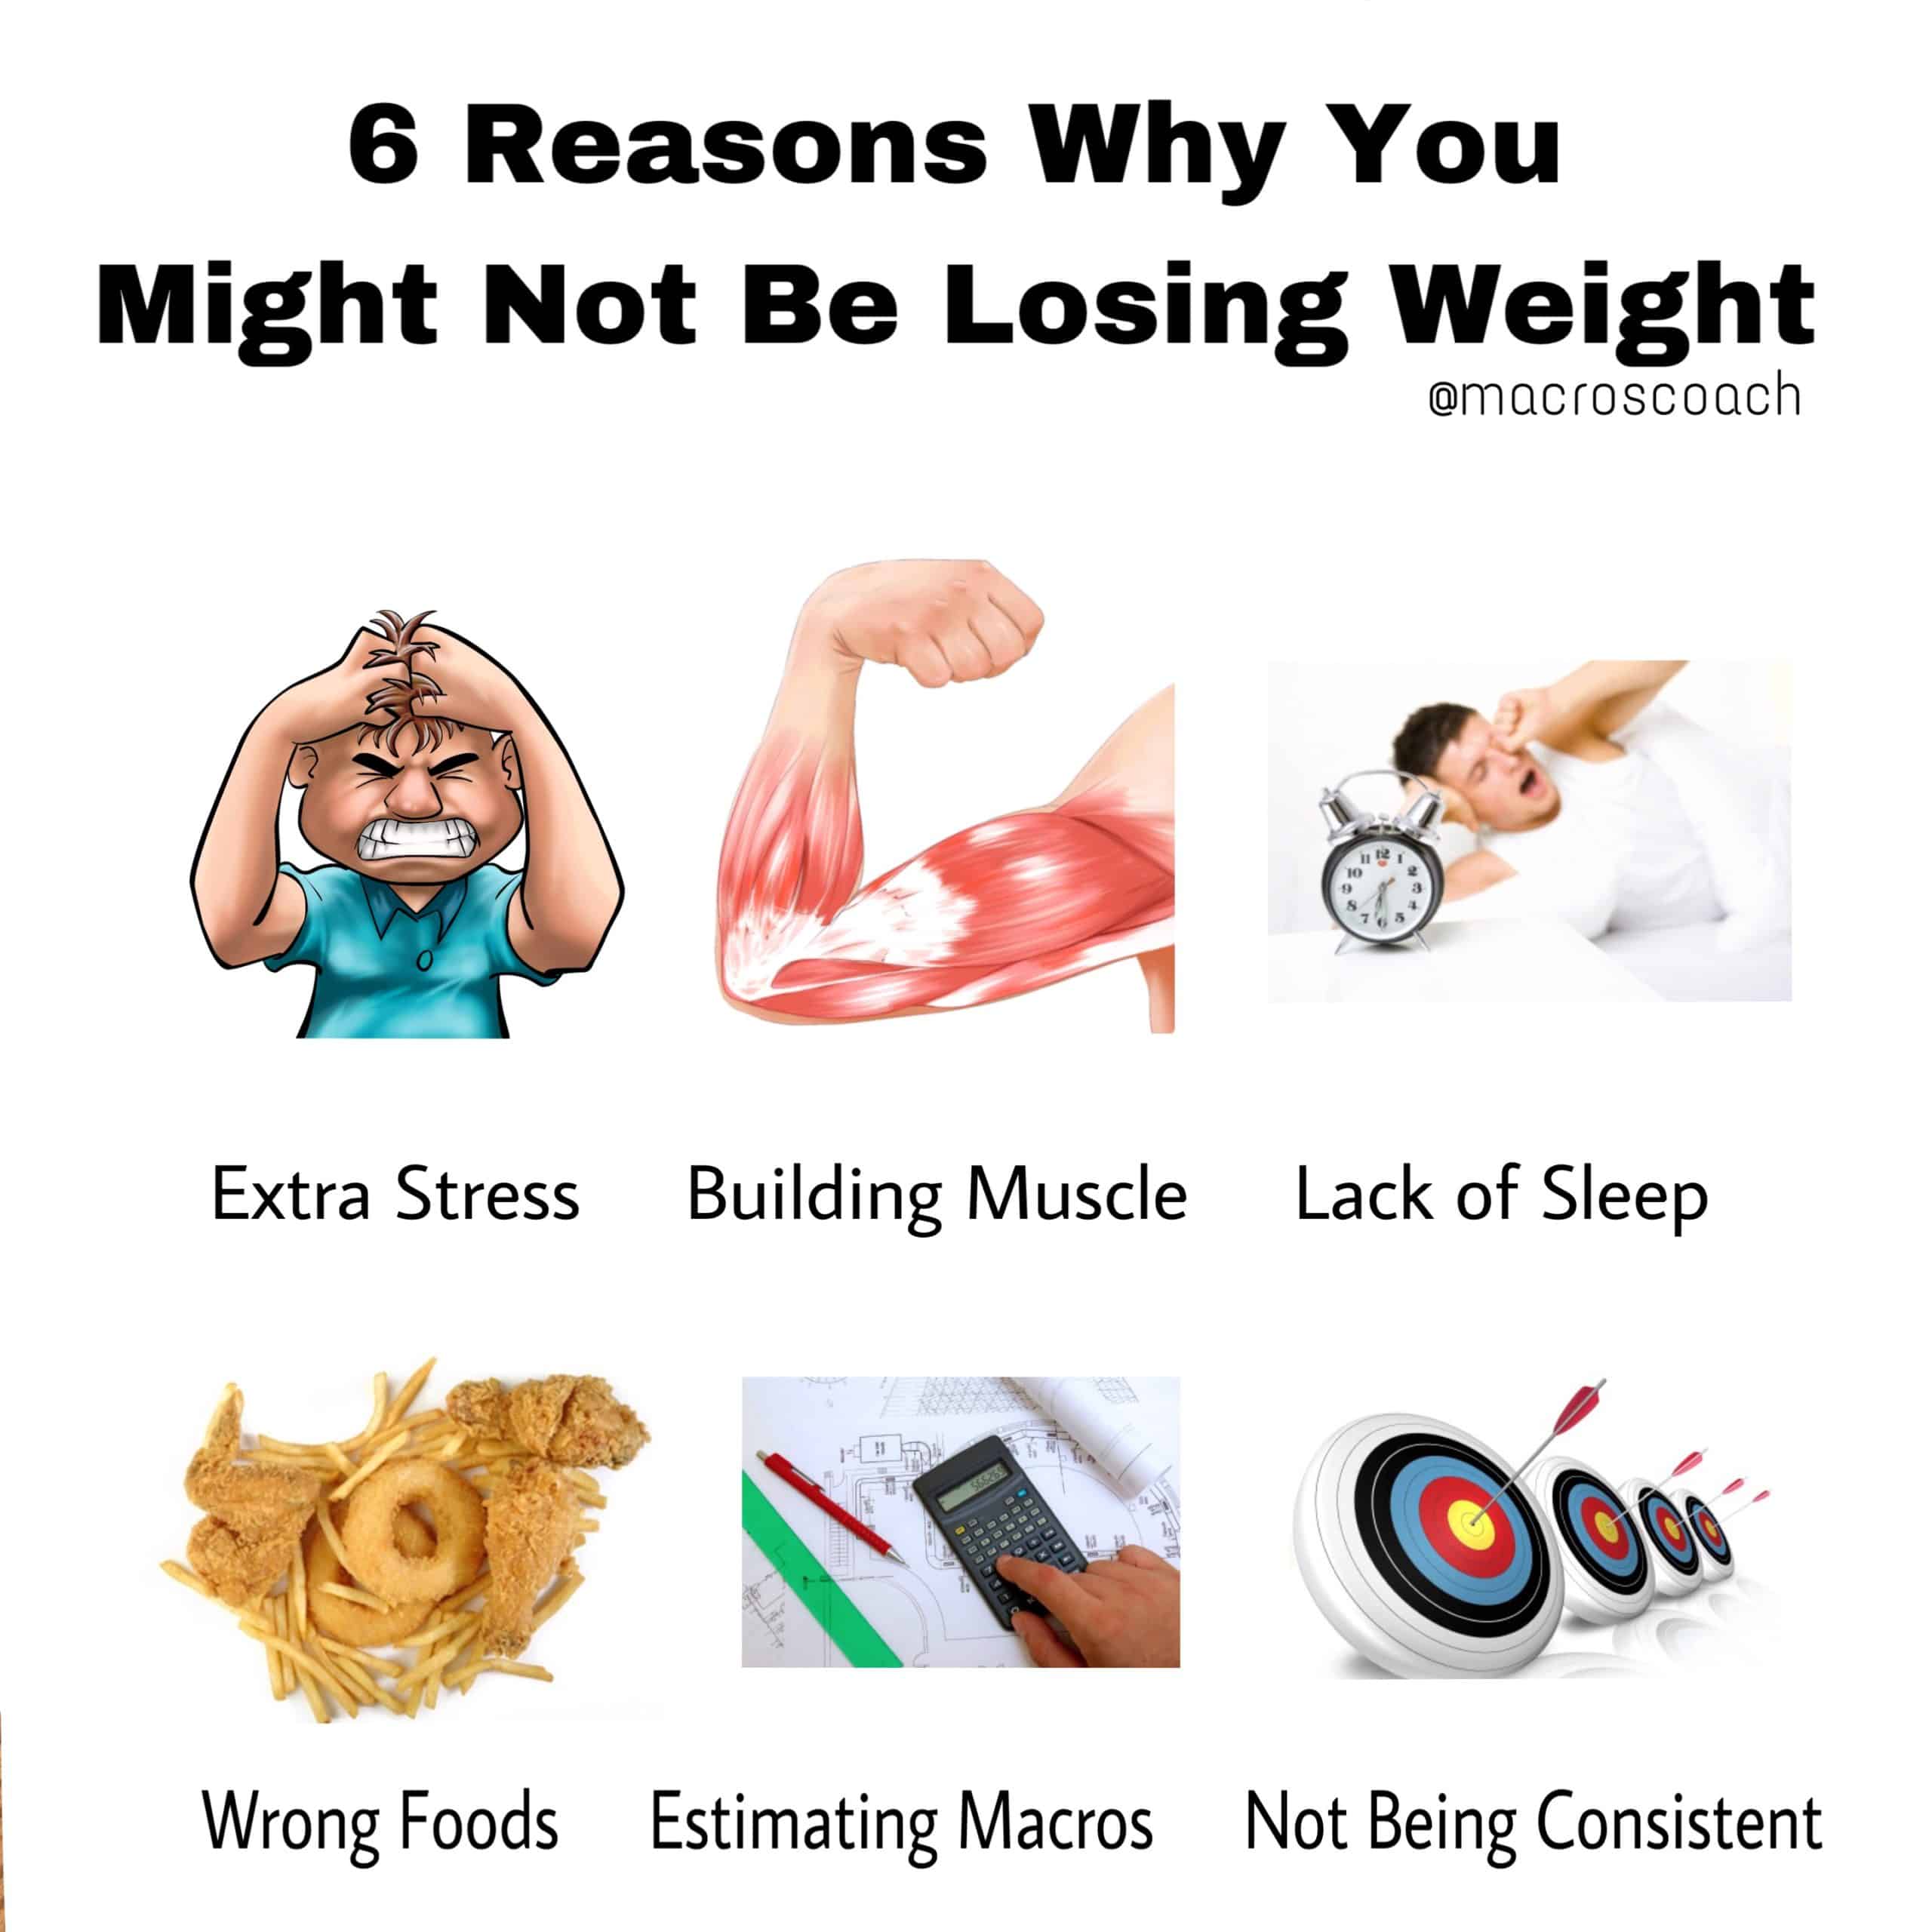 6 Reasons Why You Might Not Be Losing Weight